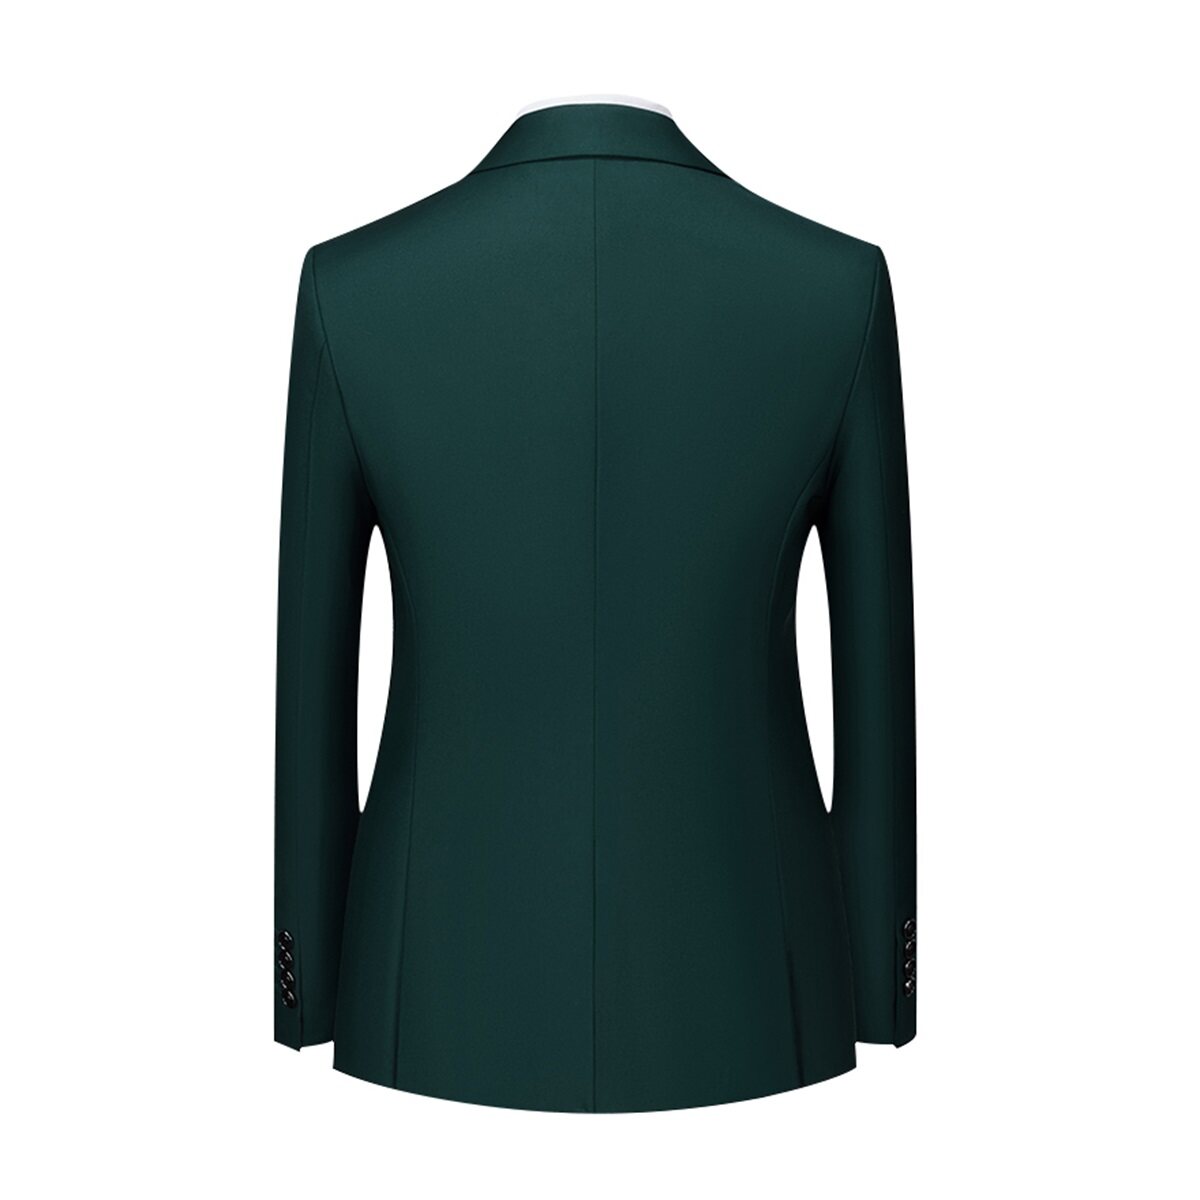 Men's Solid Color Double Breasted Business Suit Green